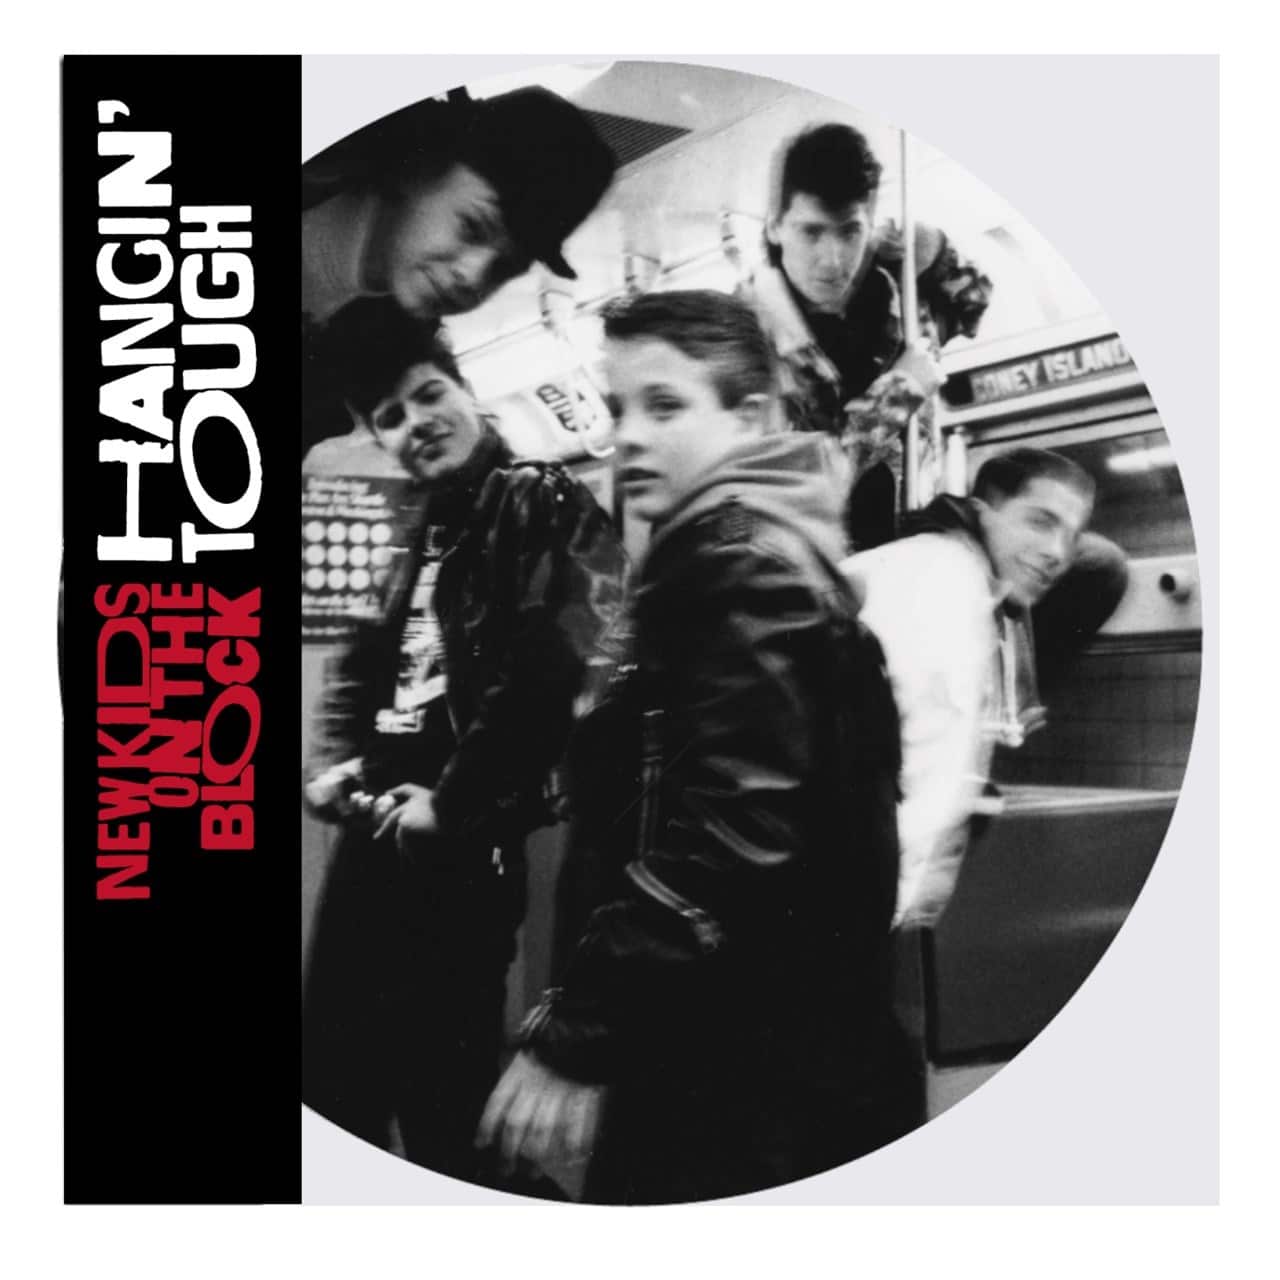 THE NEW KIDS ON THE BLOCK - HANGIN’ TOUGH